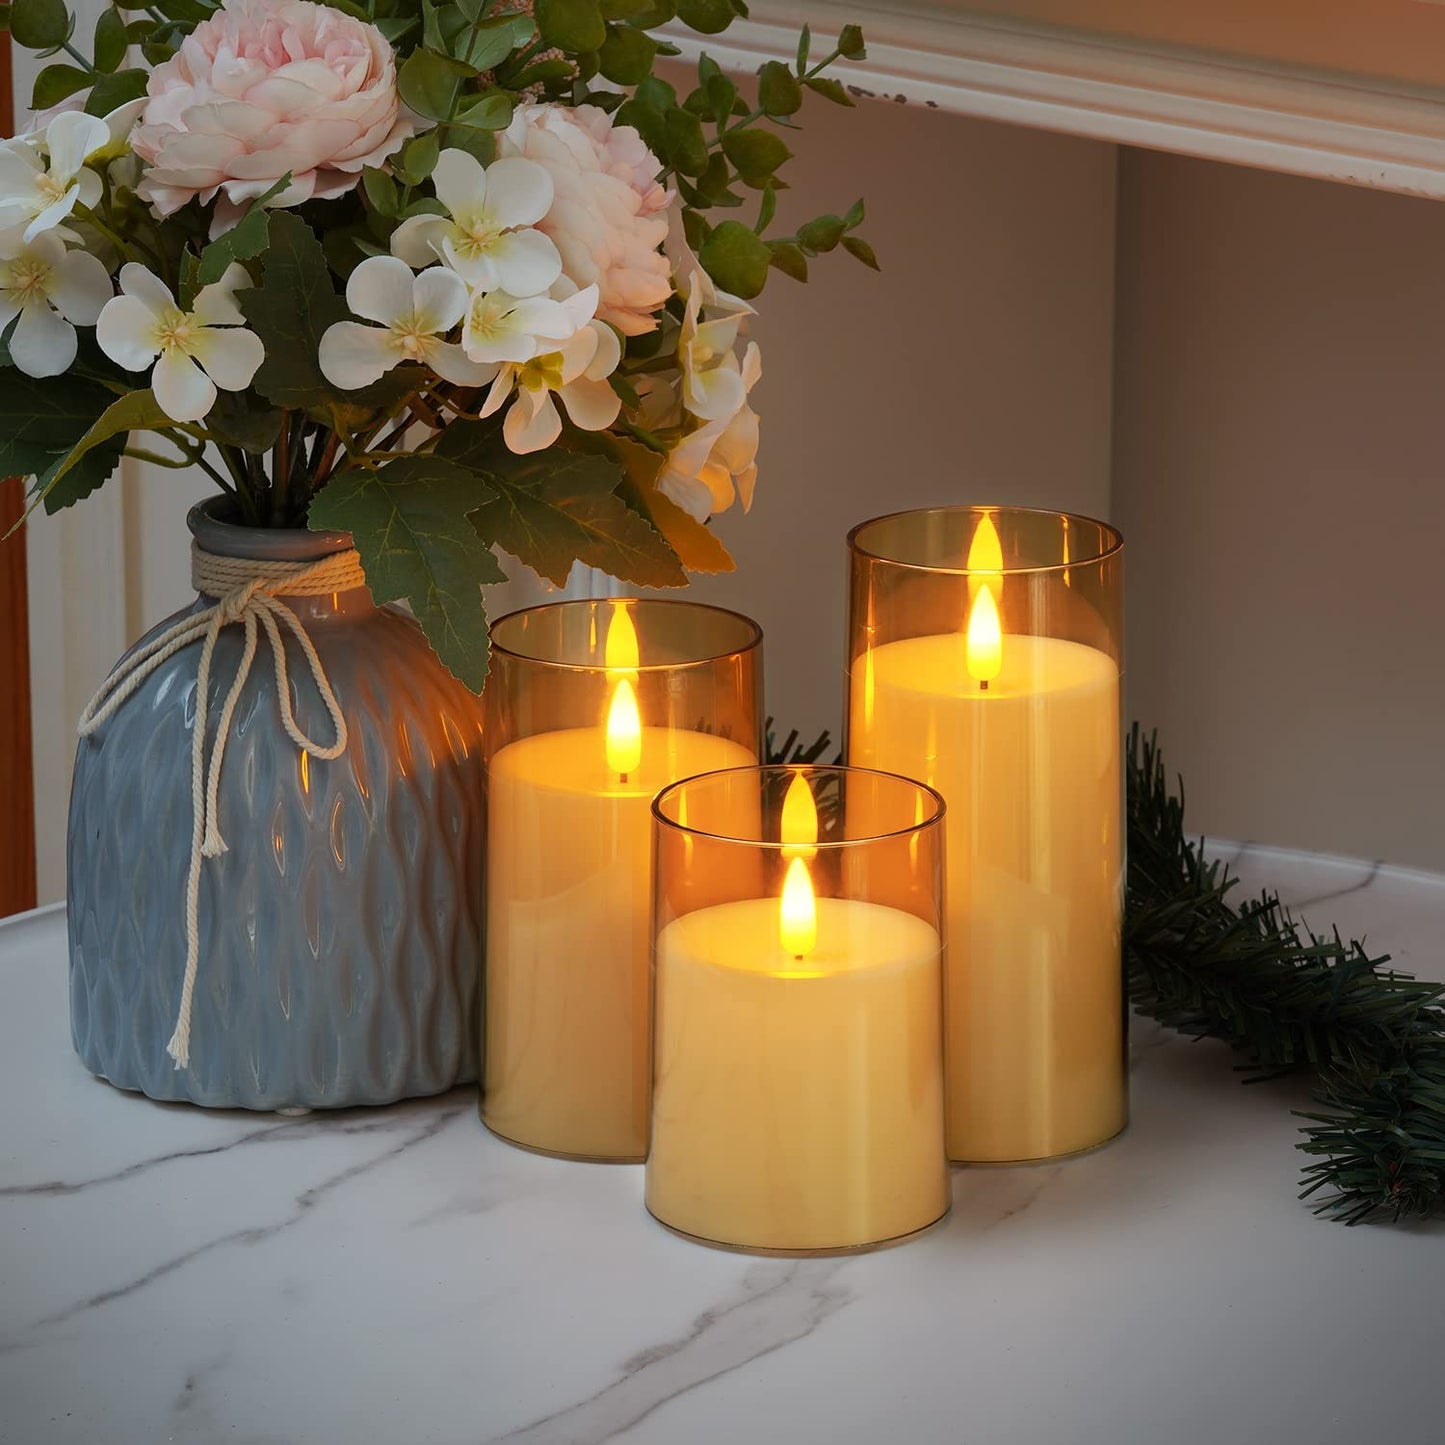 Flickering Flameless Candles Set of 3